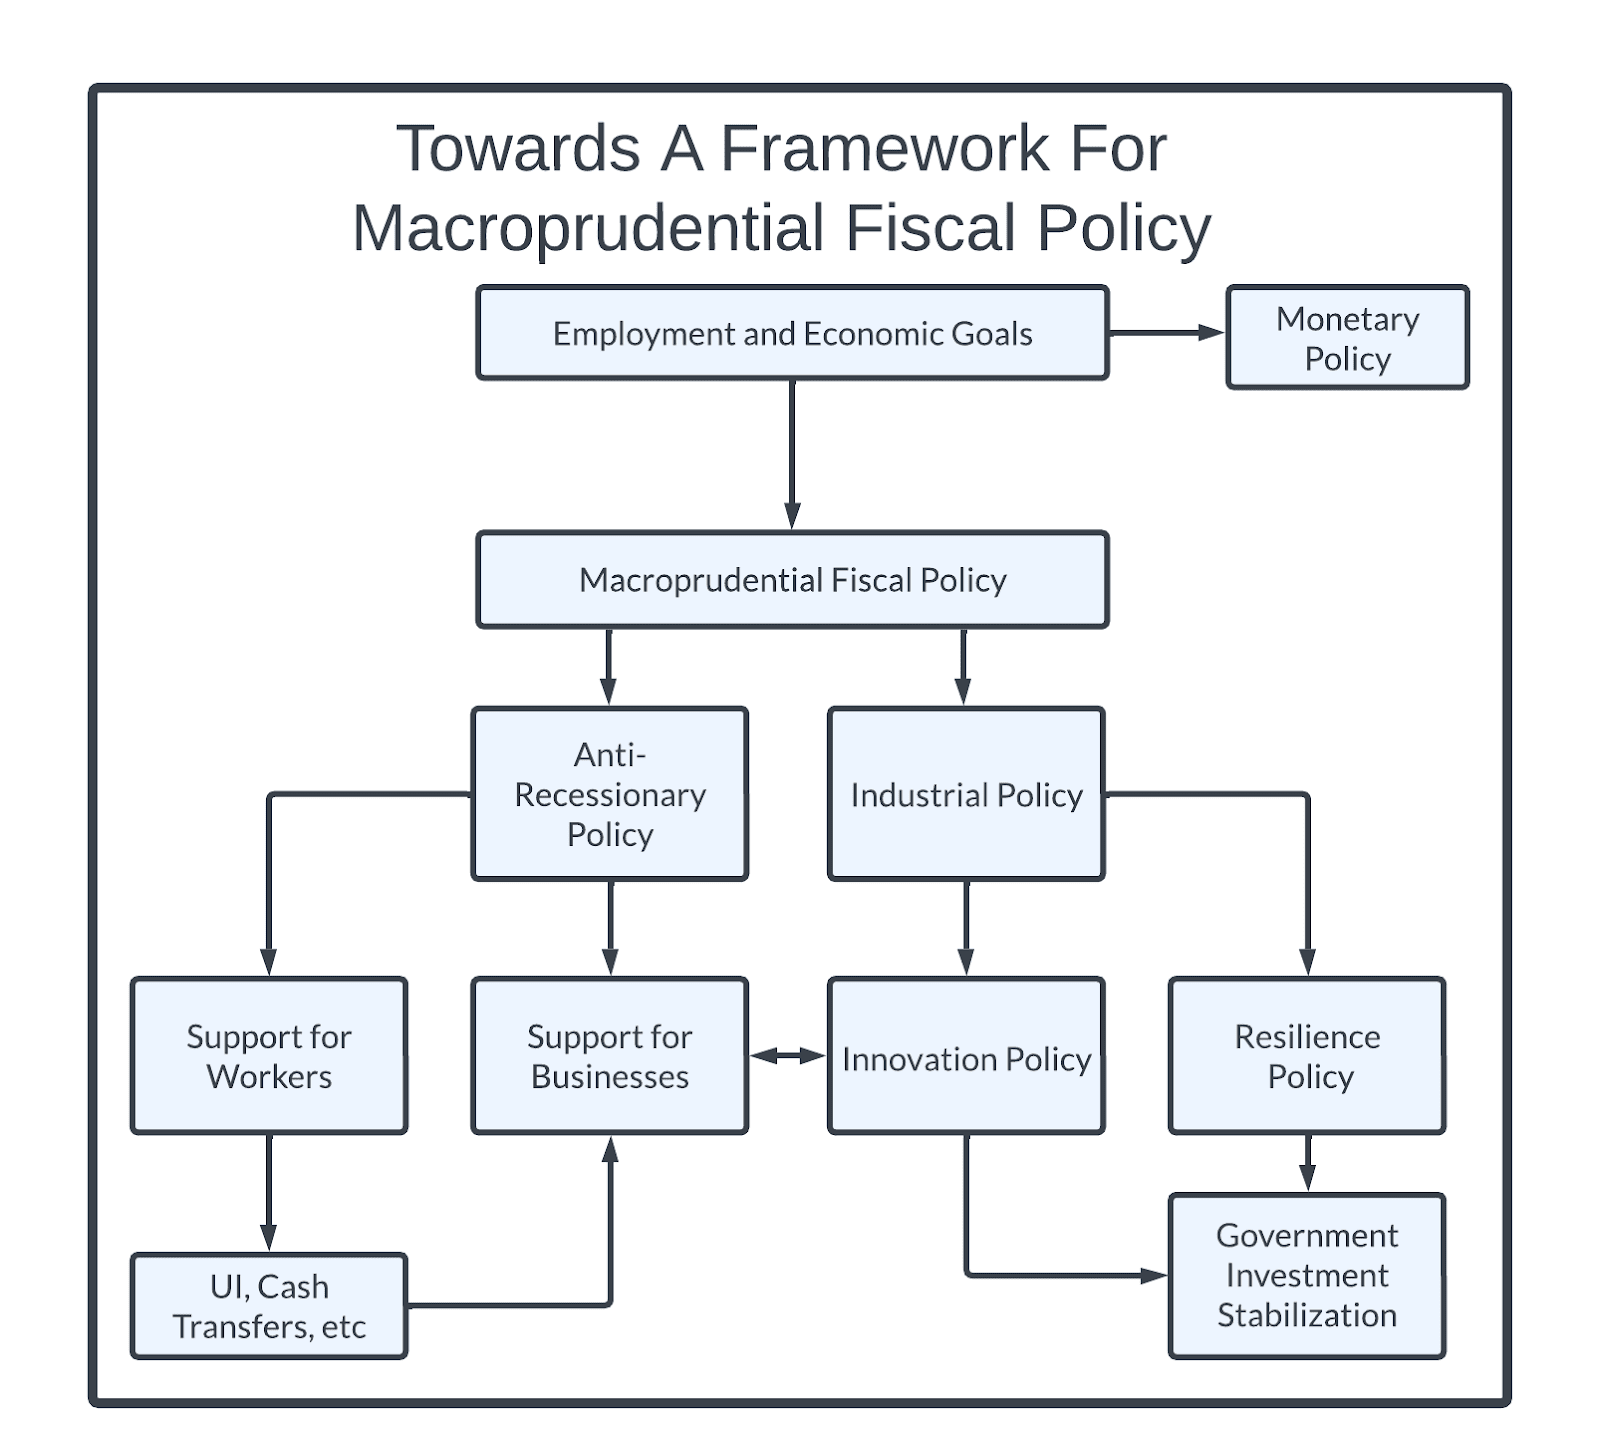 Towards Macroprudential Fiscal Policy